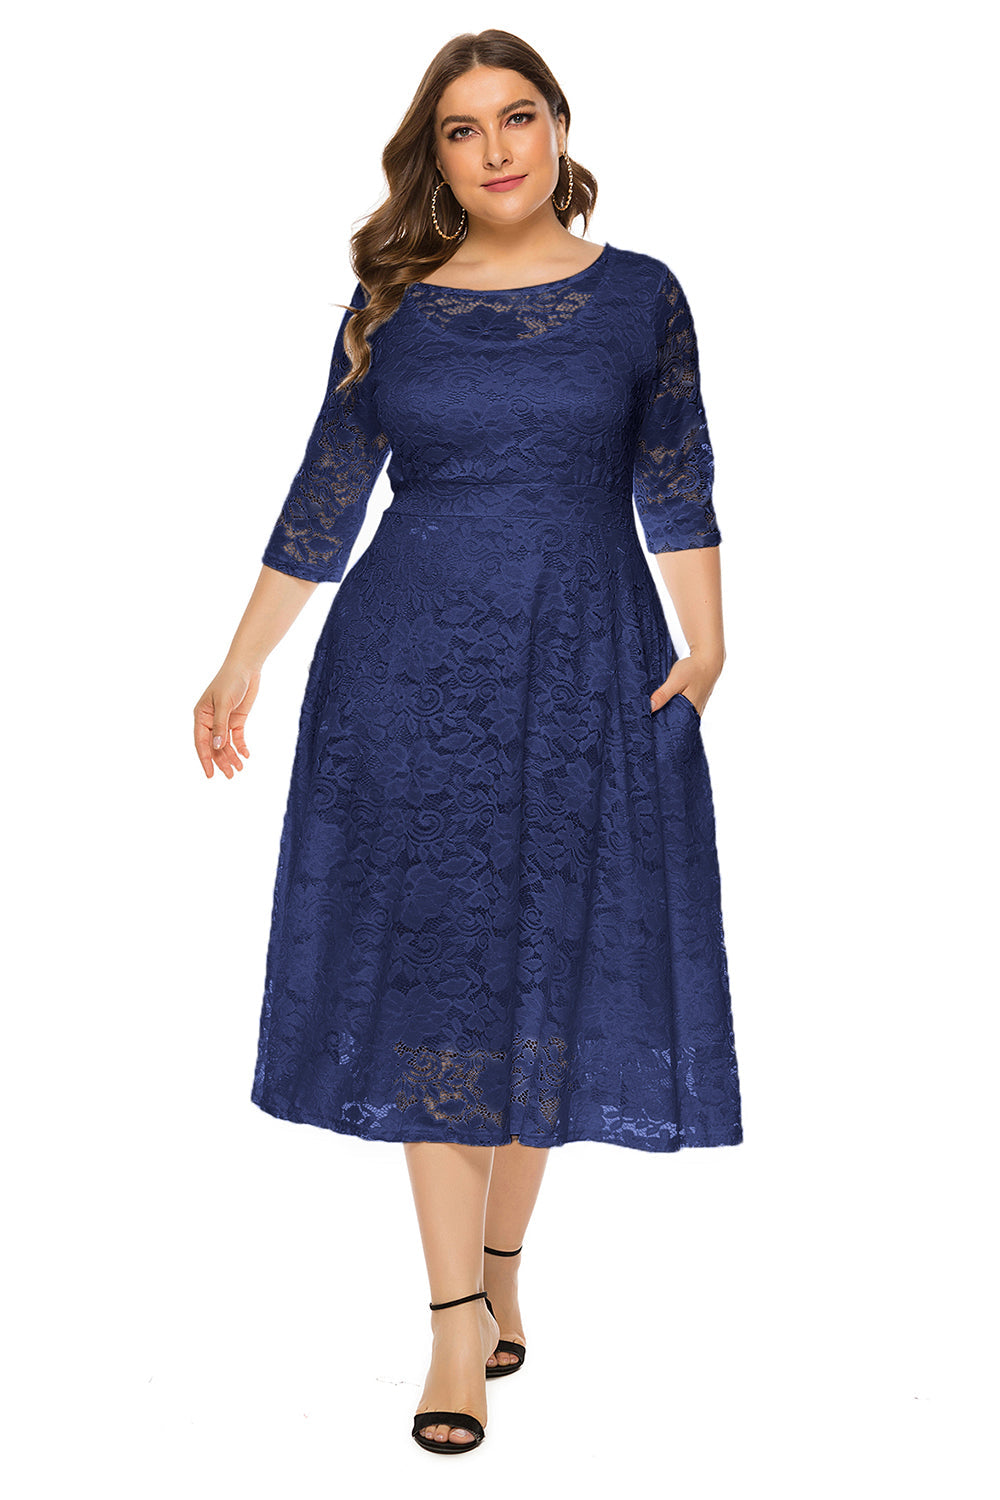 Plus Size Long Sleeves Lace Dress